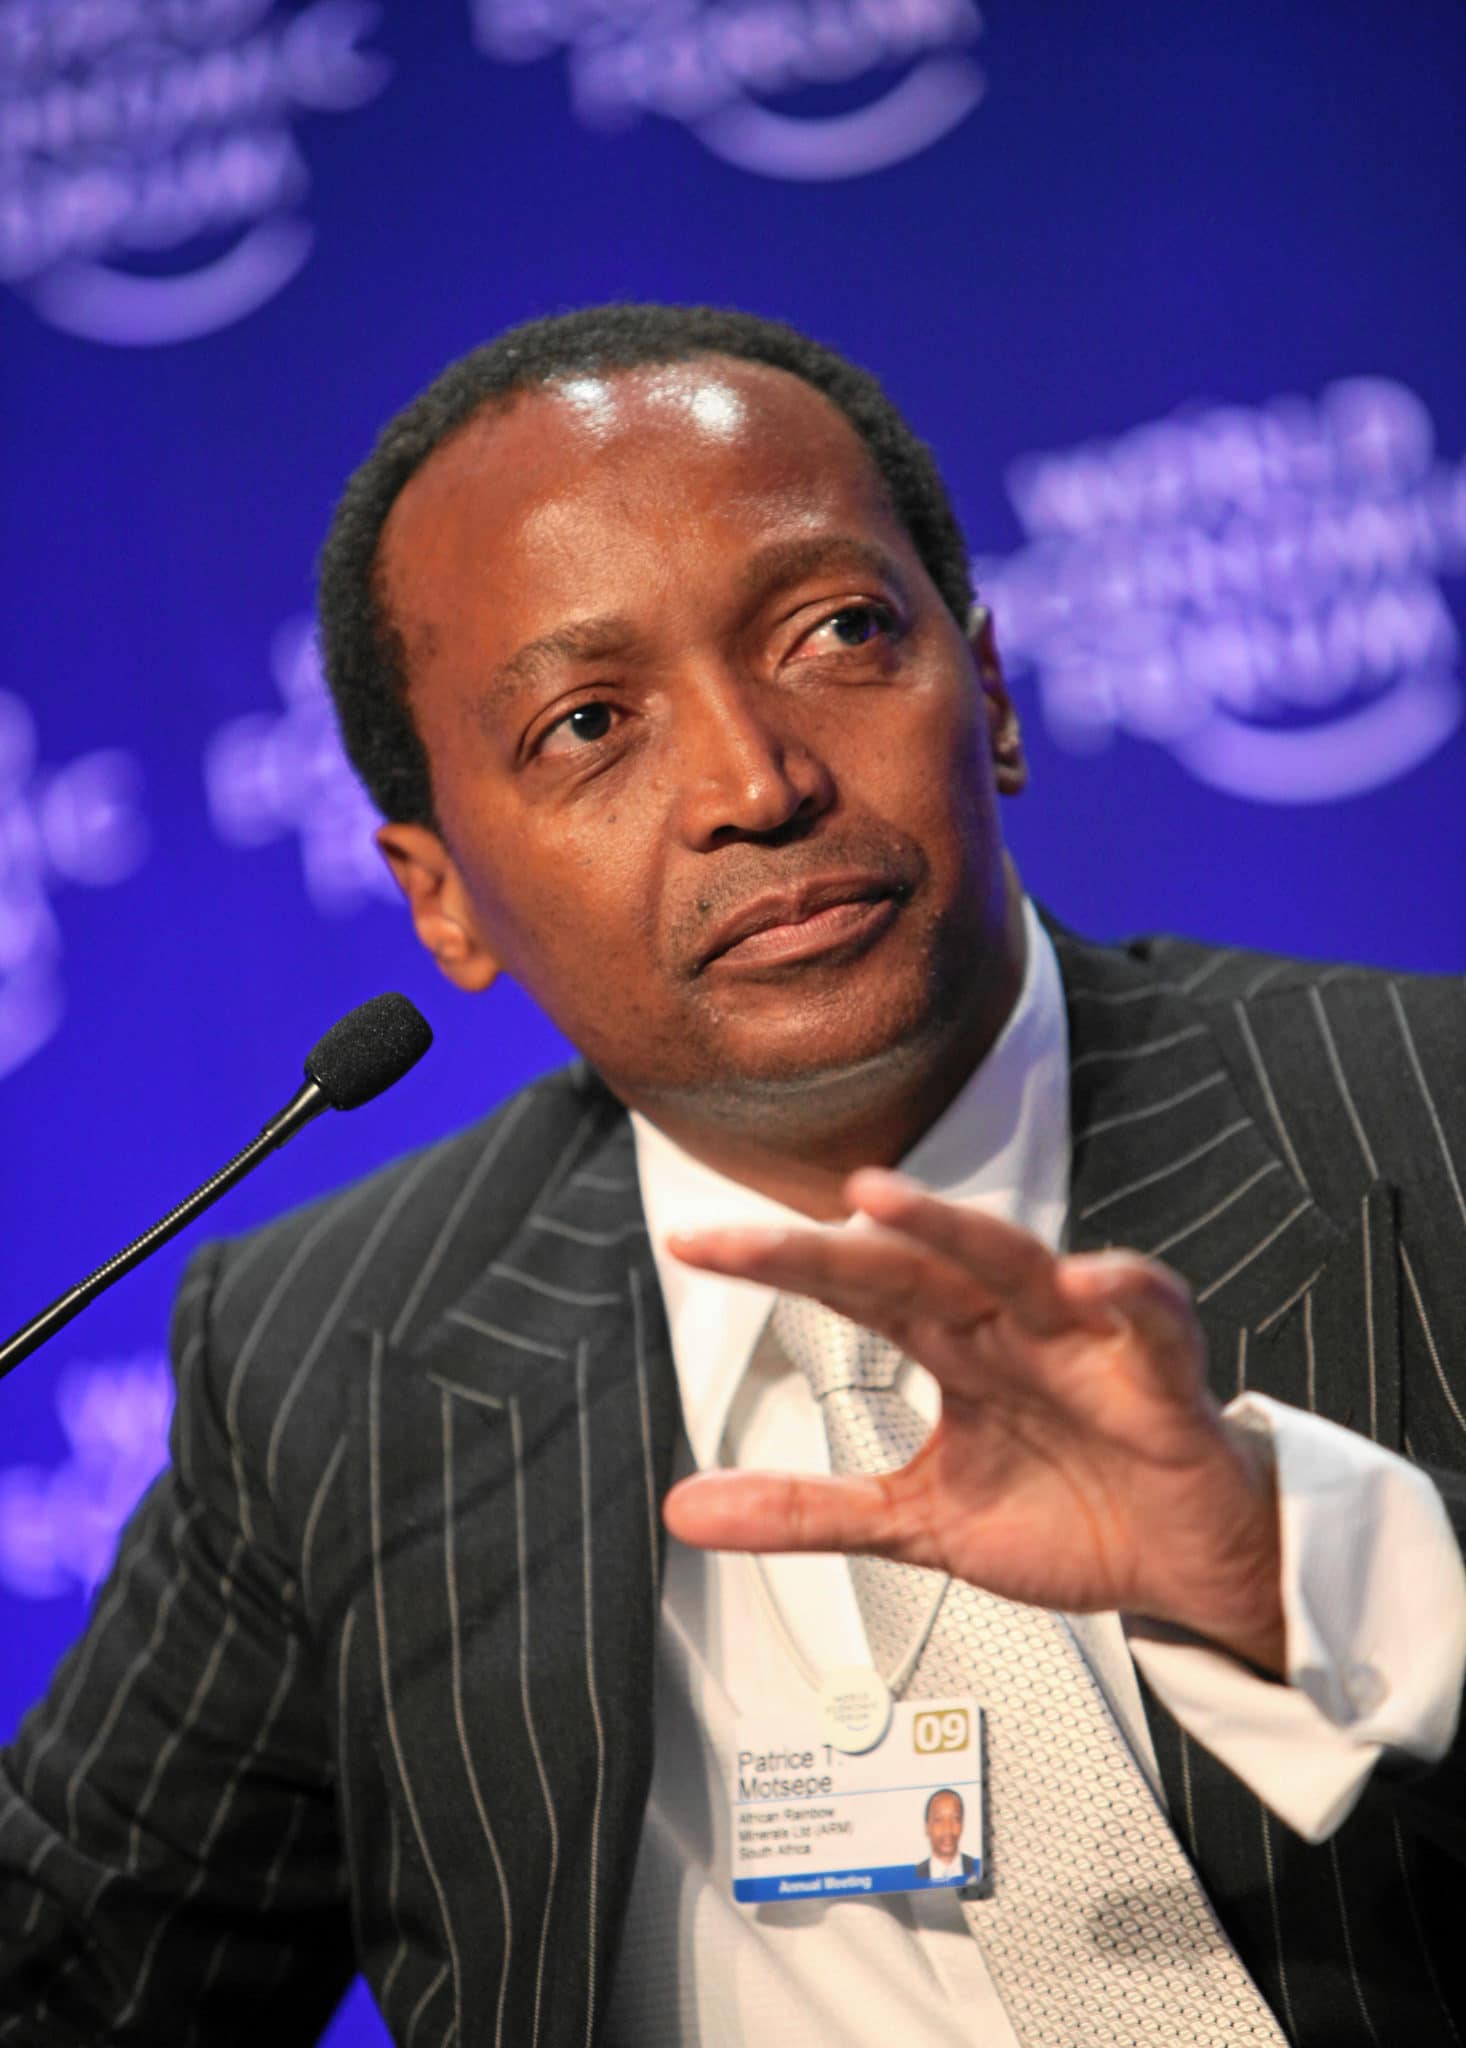 Motsepe family & associates join Rupert and Oppenheimer families in donating R1bn to deal with COVID-19 pandemic